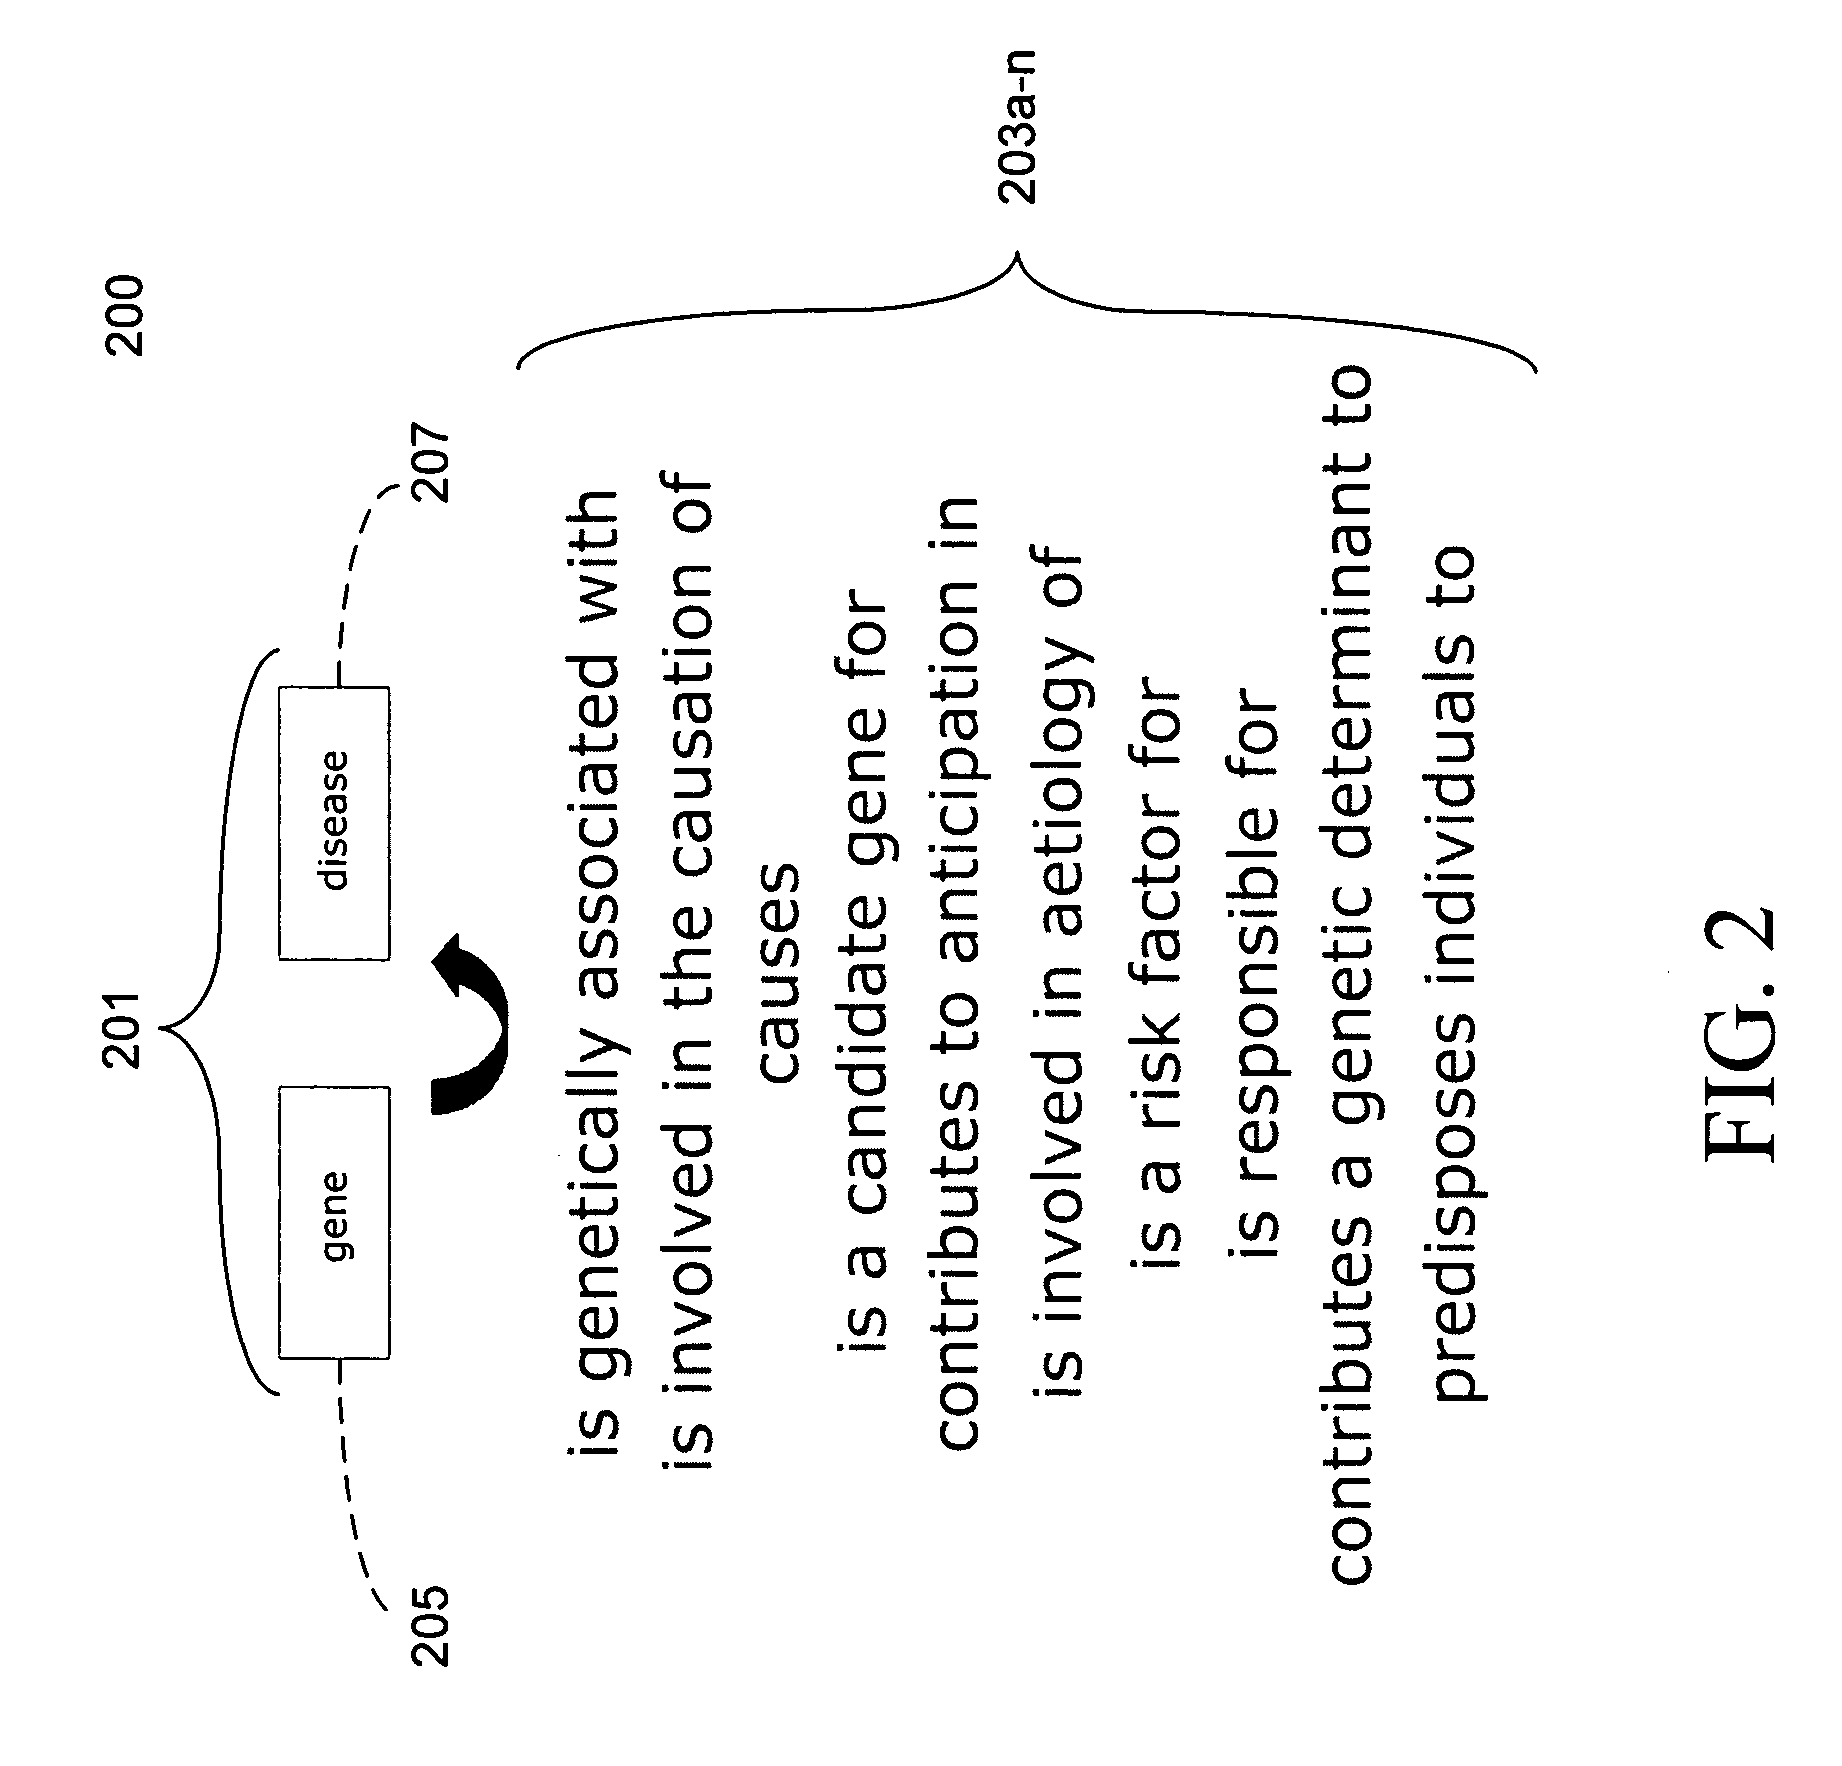 System and method for utilizing an upper ontology in the creation of one or more multi-relational ontologies